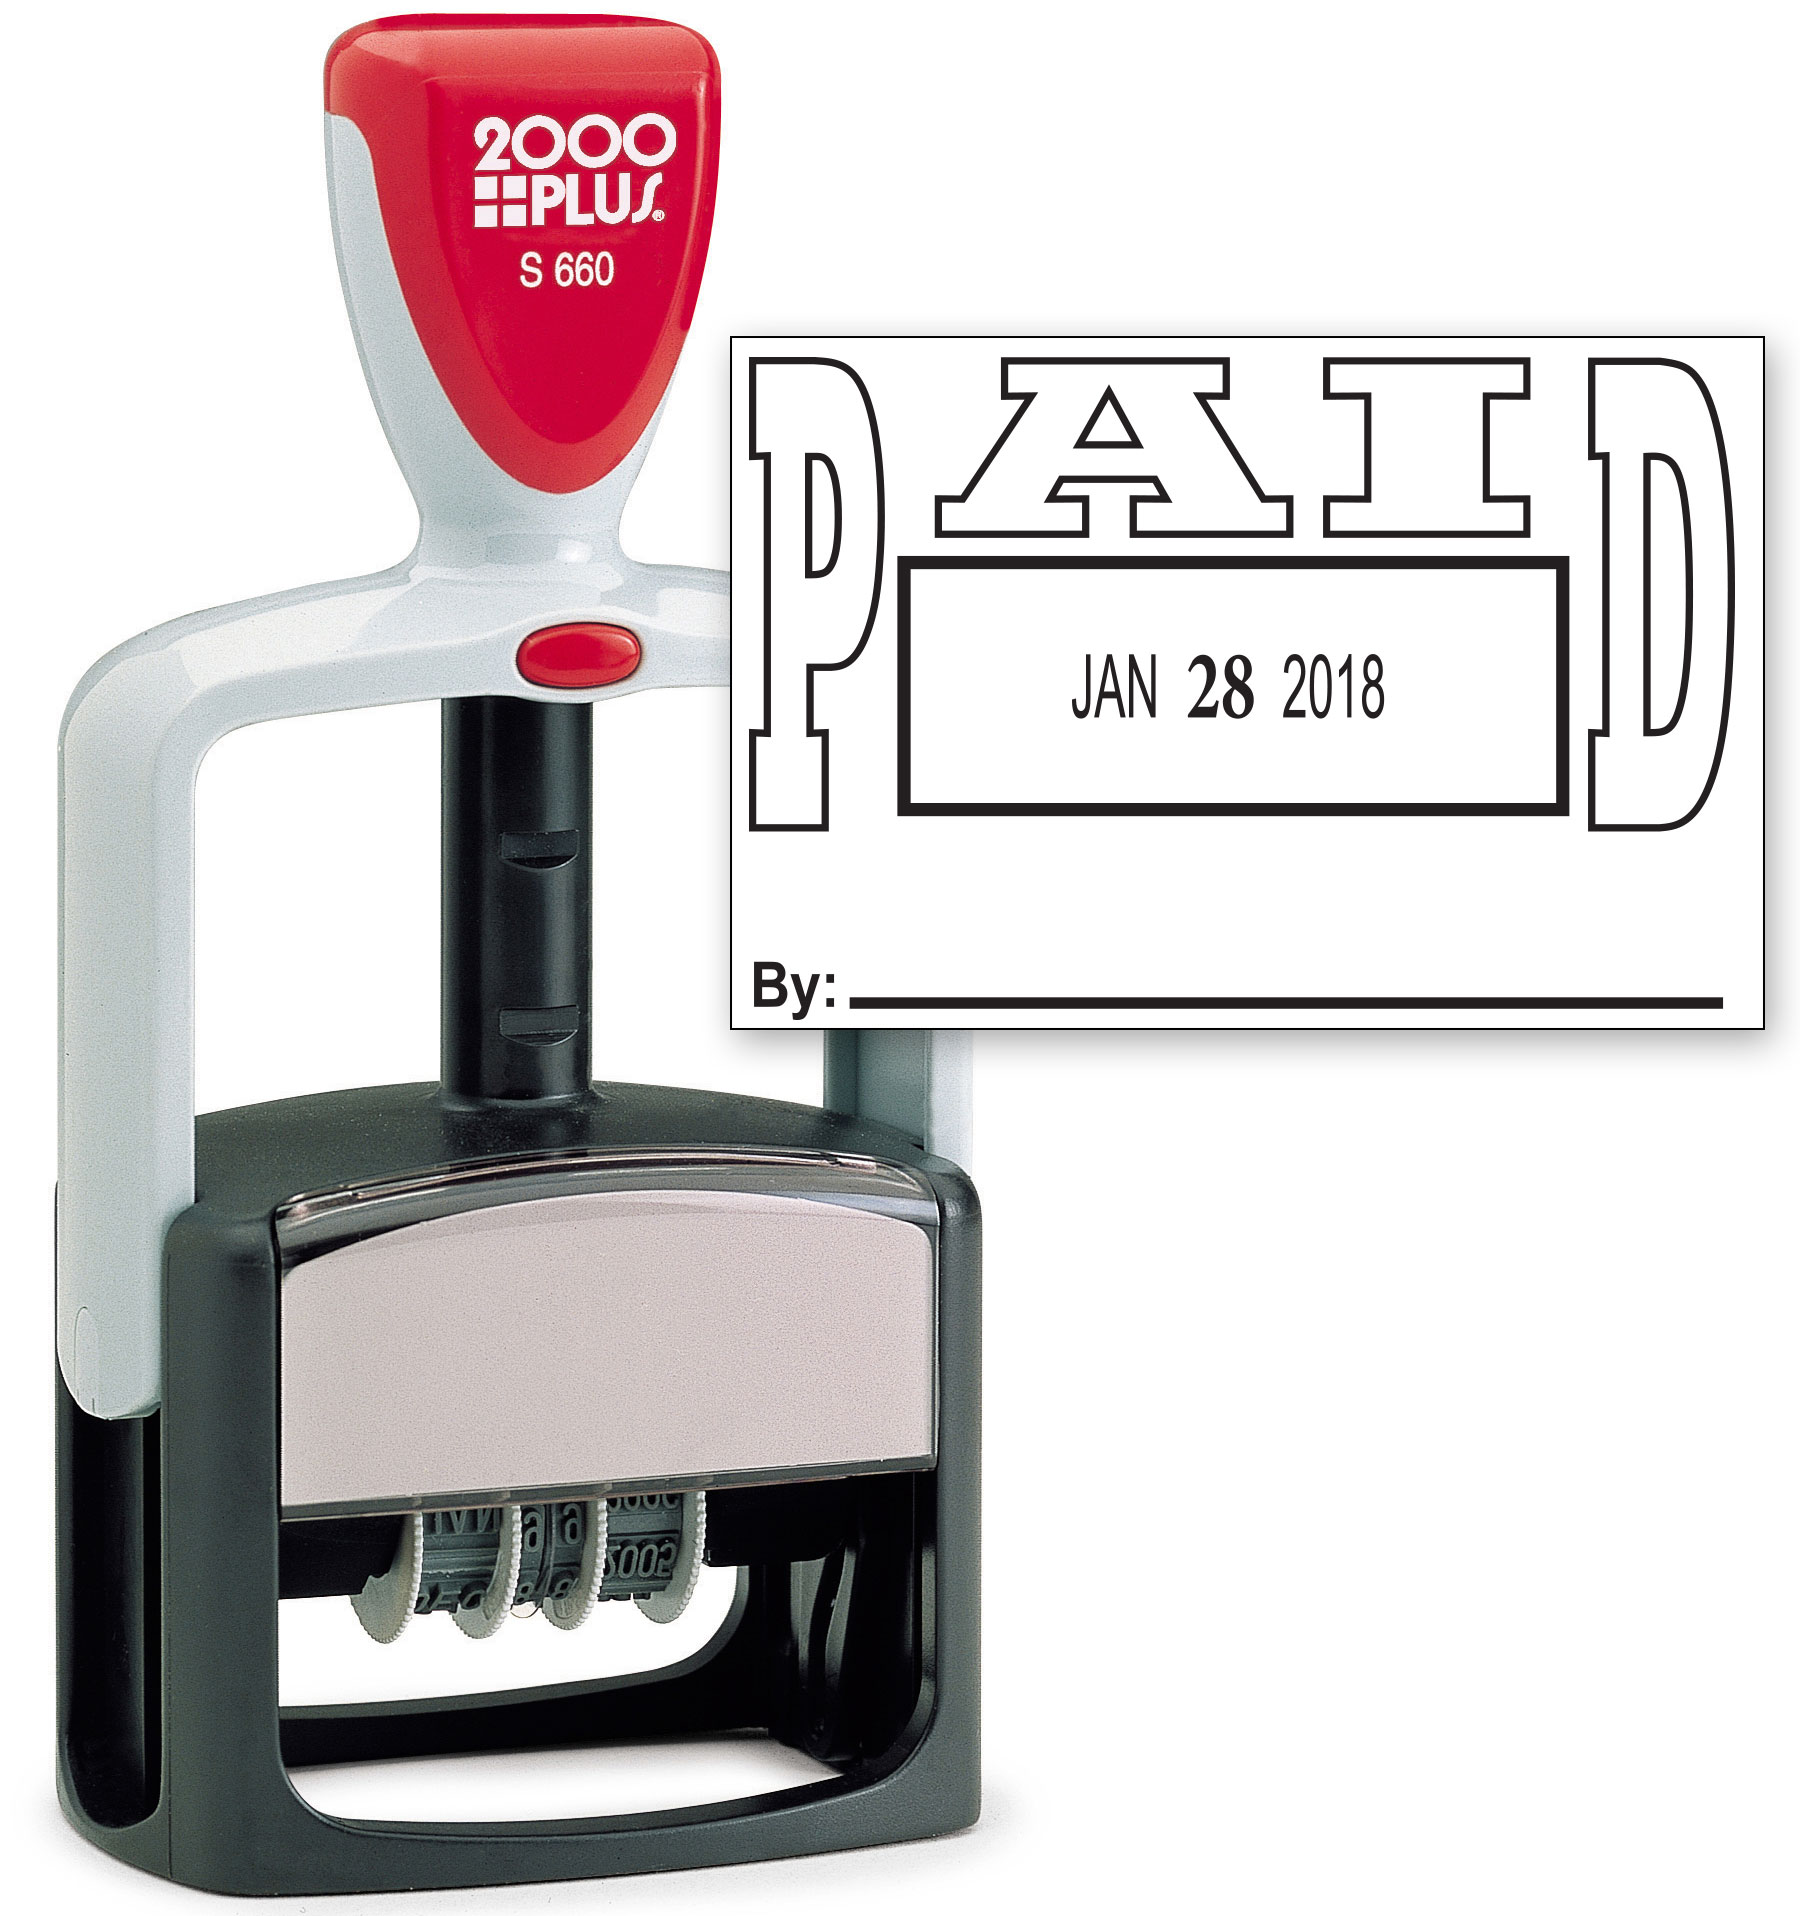 2000 PLUS Heavy Duty Style 2-Color Date Stamp with PAID self inking stamp - Black Ink